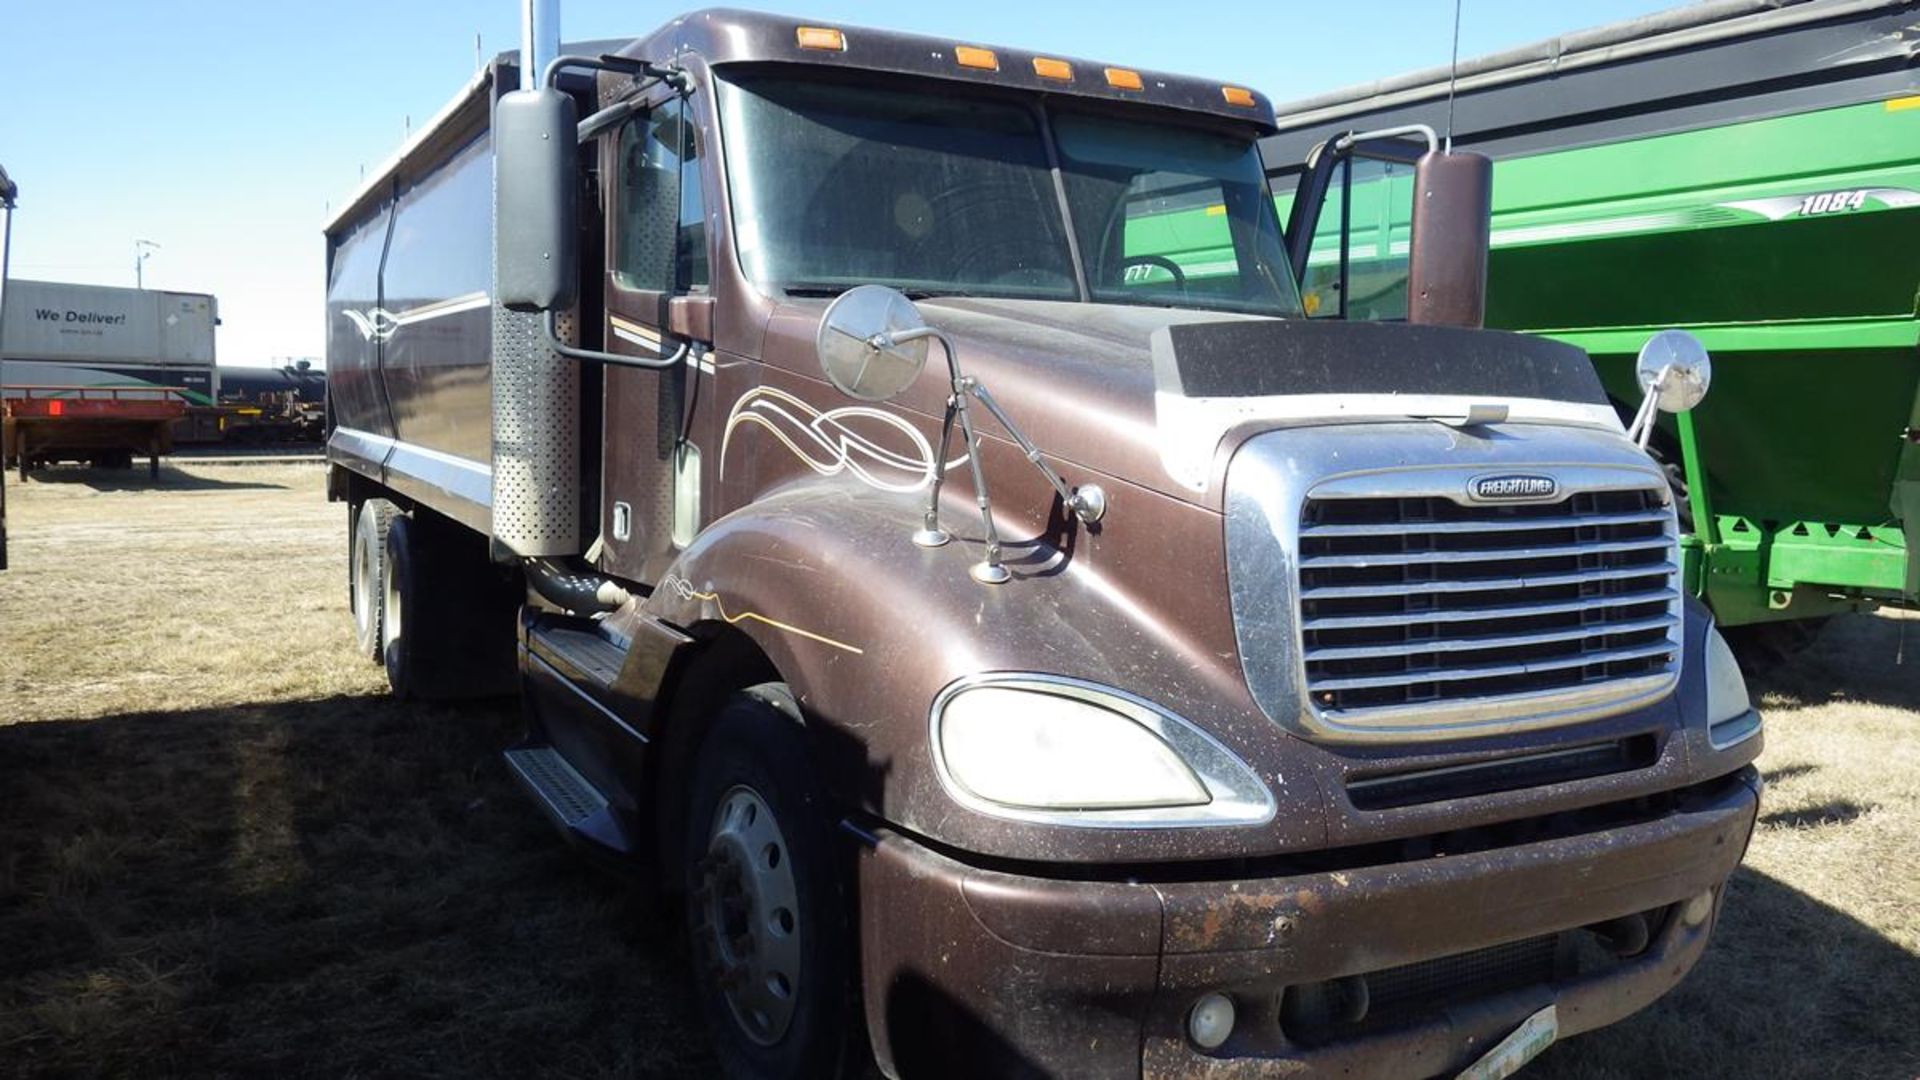 2006 Freightliner Grain truck Vin# 1FUJA6CK26PW68702Kms 104,376 showing 13089.9 Hours with Detroit - Image 7 of 23